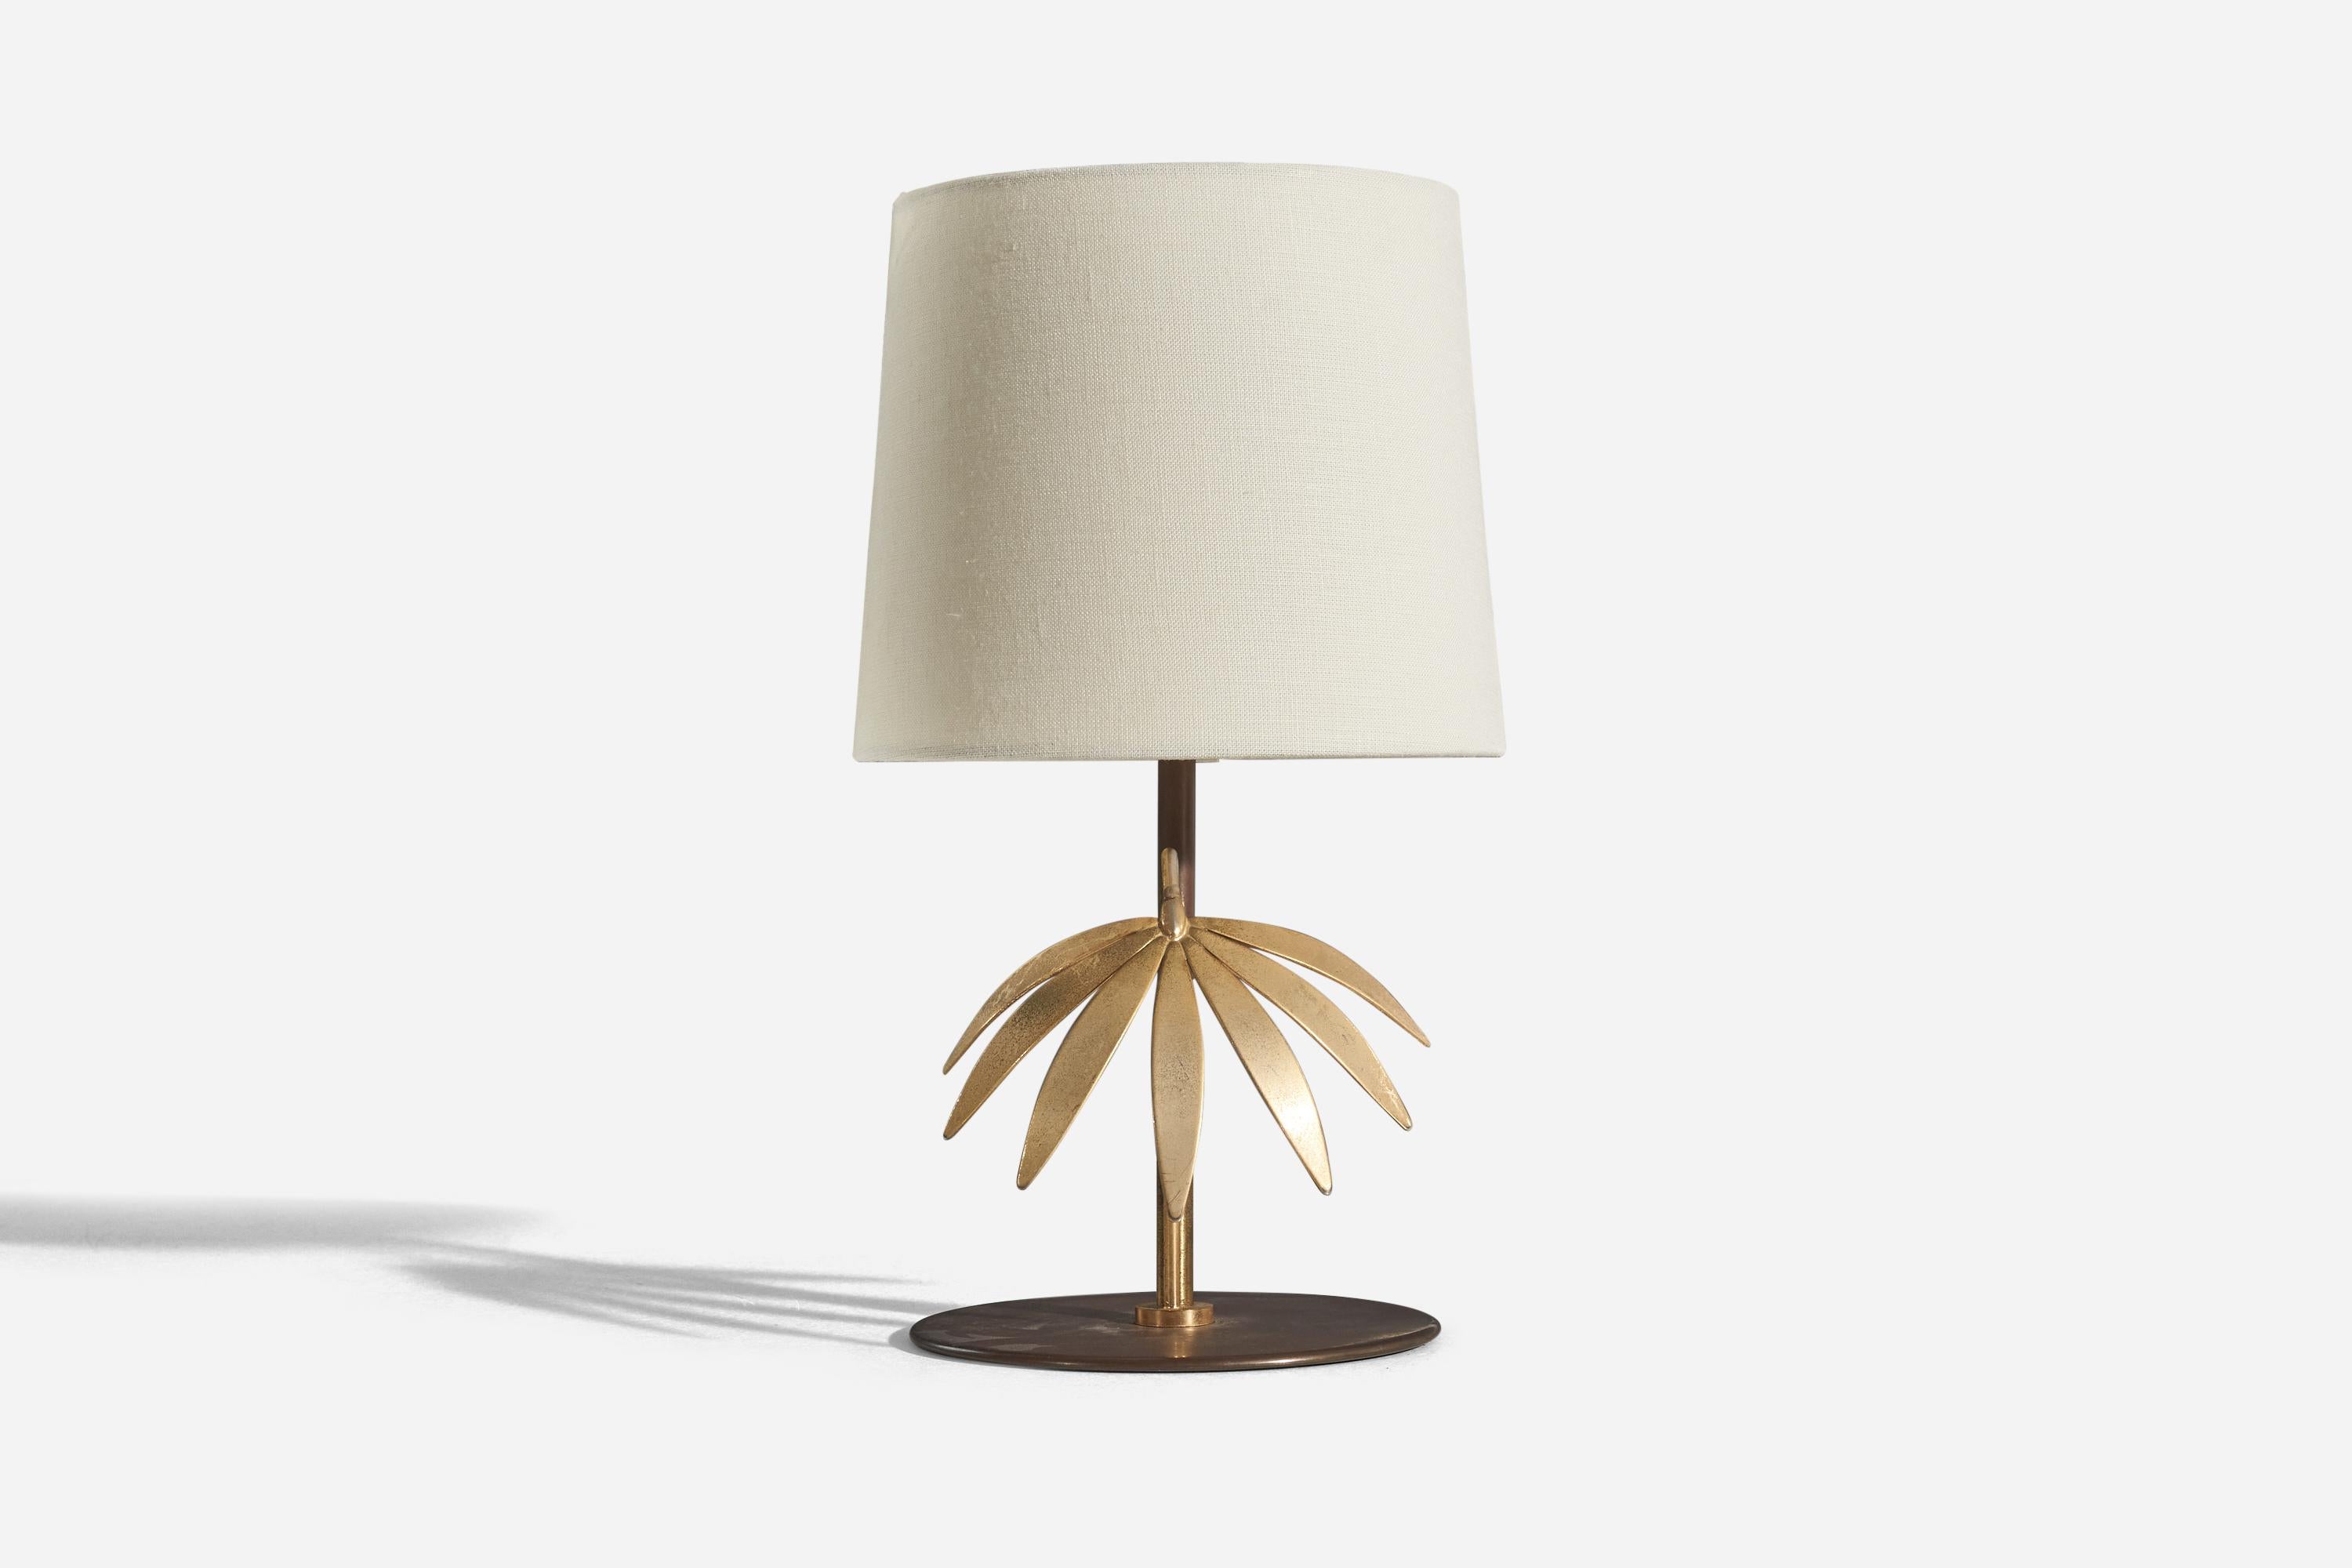 A brass table lamp designed and produced in Italy, 1970s. 

Sold without lampshade. 
Dimensions of Lamp (inches) : 10 x 6.75 x 6.62 (H x W x D)
Dimensions of Shade (inches) : 7 x 8 x 7 (T x B x S)
Dimension of Lamp with Shade (inches) : 14.25 x